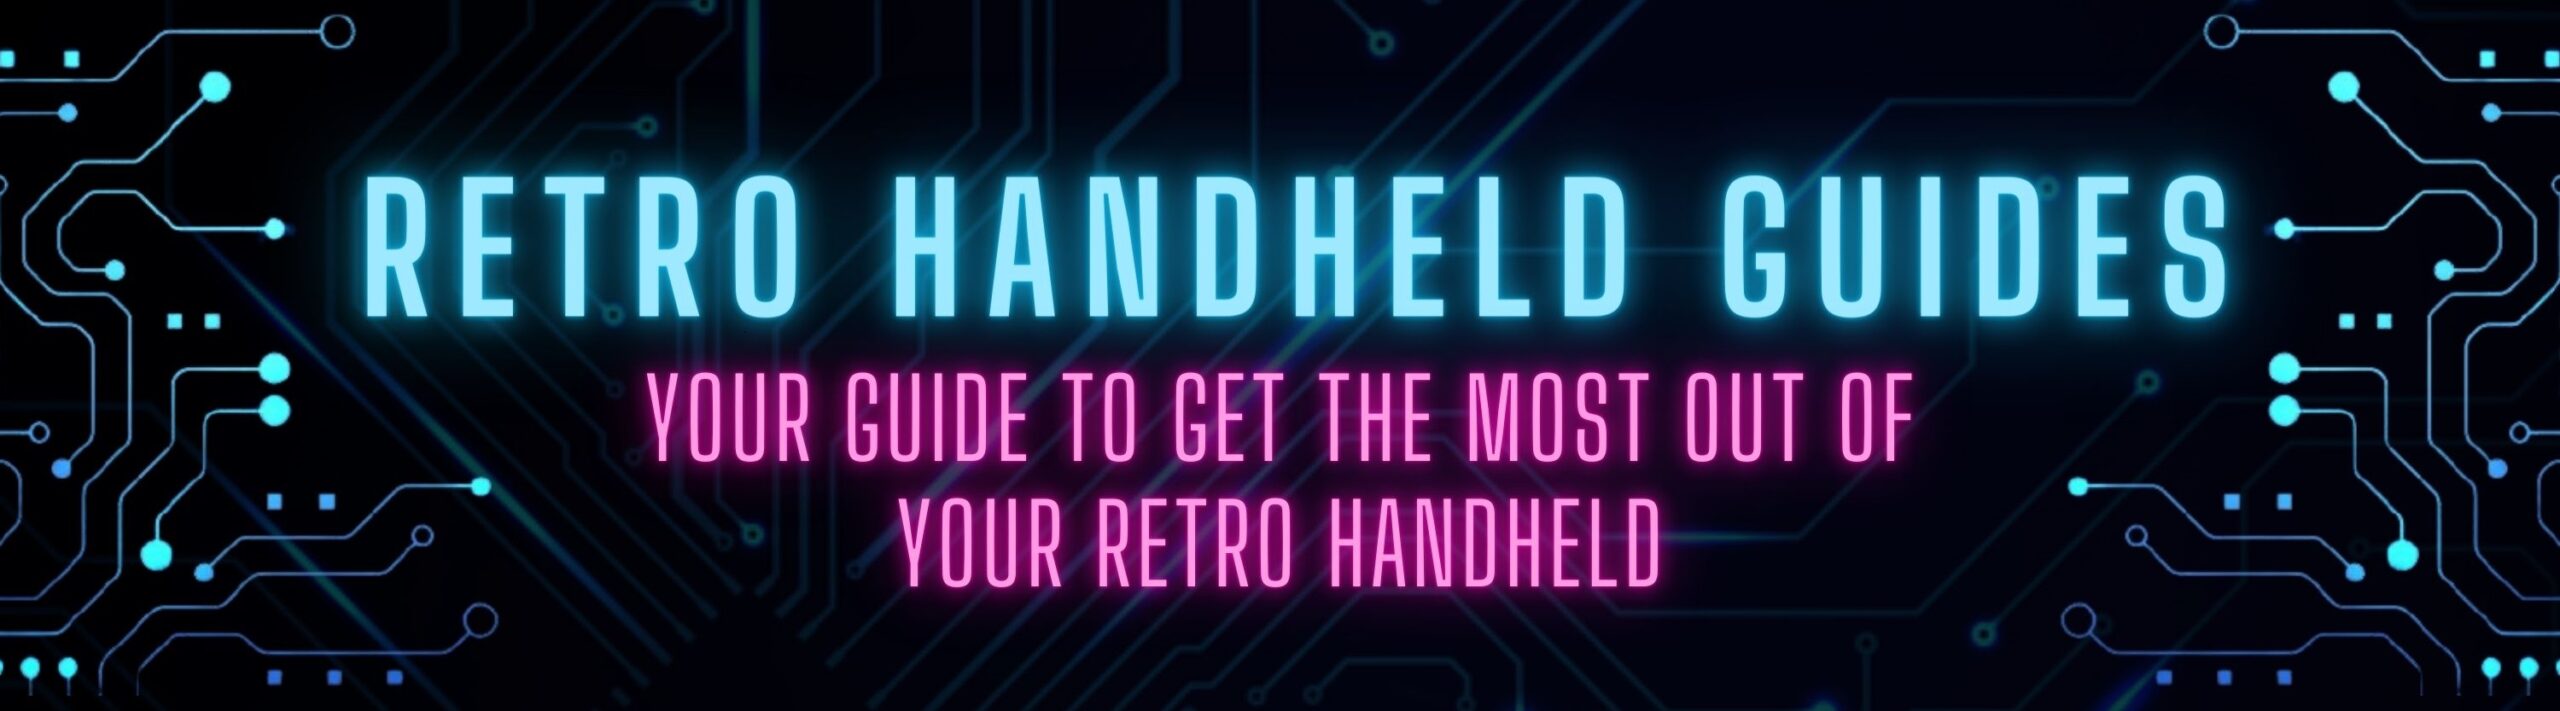 Retro Handheld Guides. Your guide to get the most out of your retro handheld